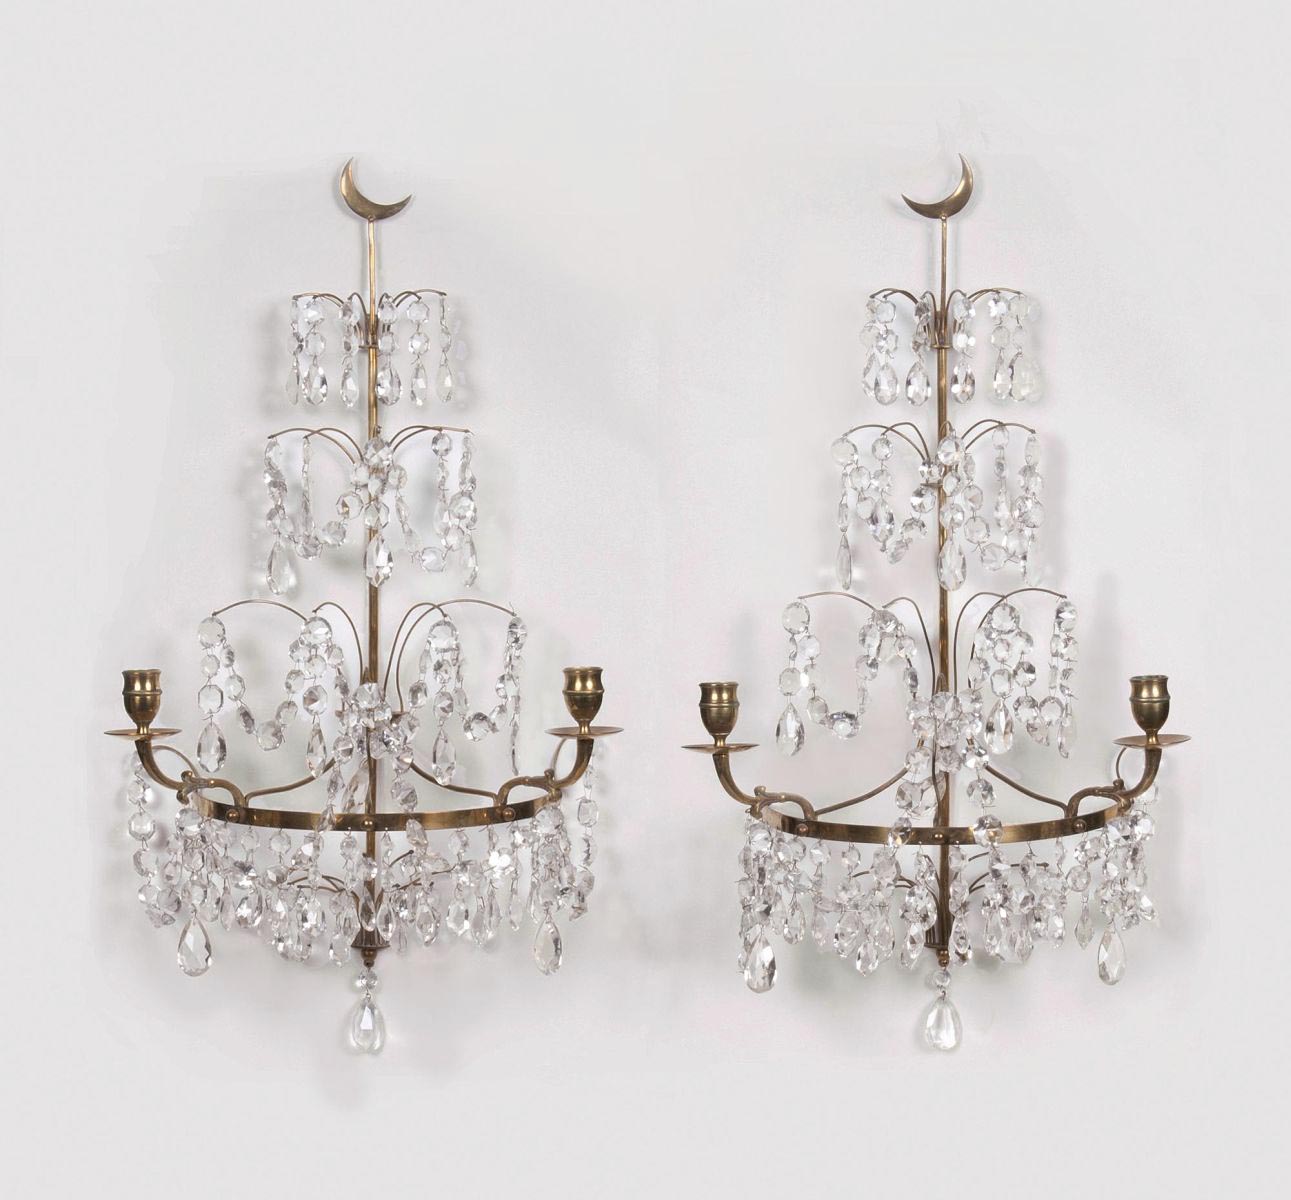 A Pair of Filigree Crystal Glass Wall Applications